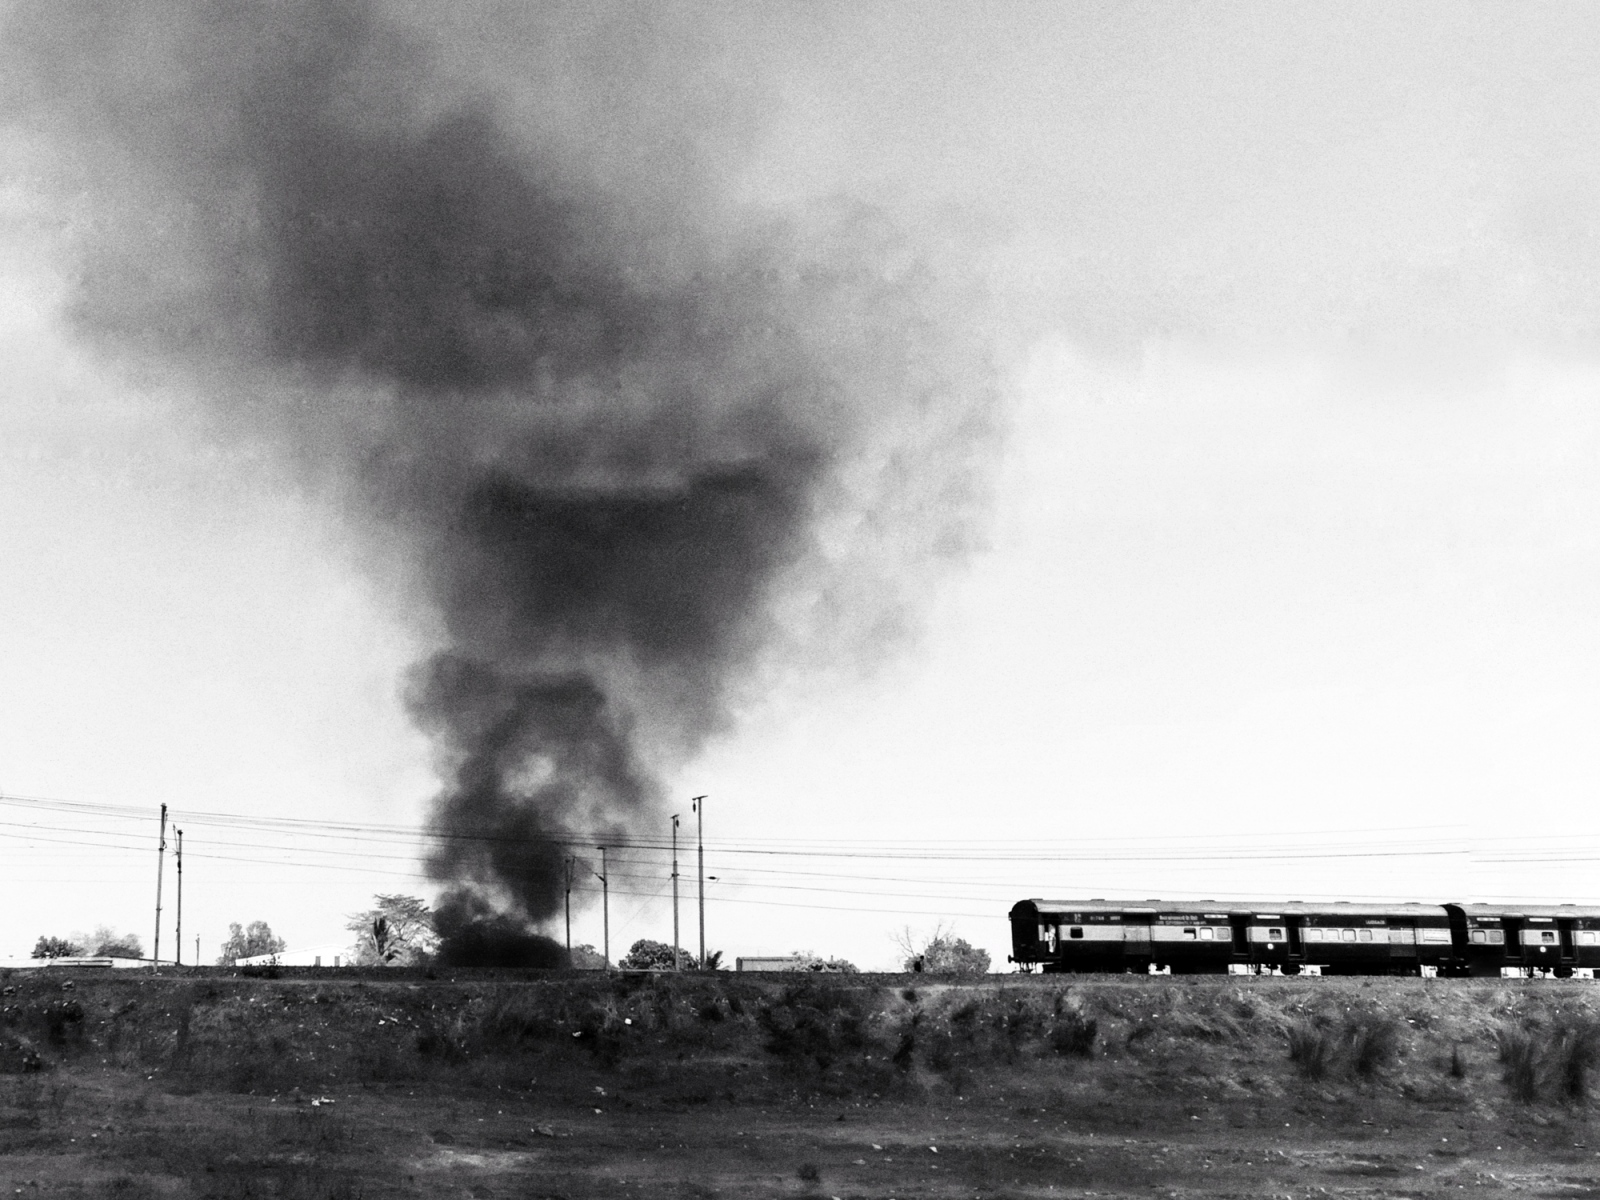 A train passes by a huge smoke ...een taking place in the region.